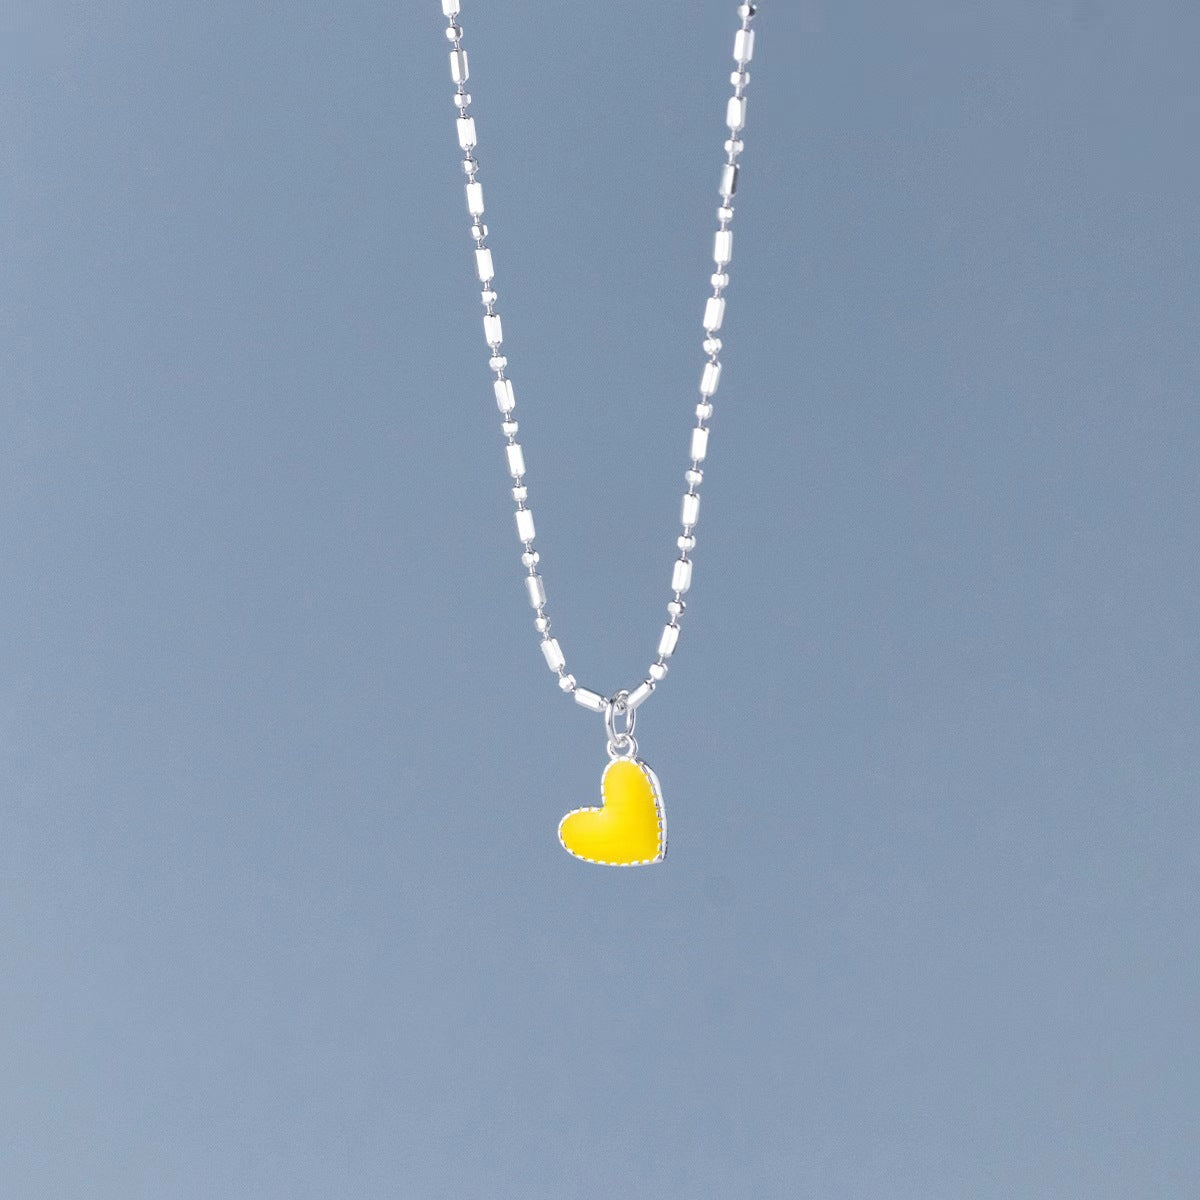 yellow heart necklace